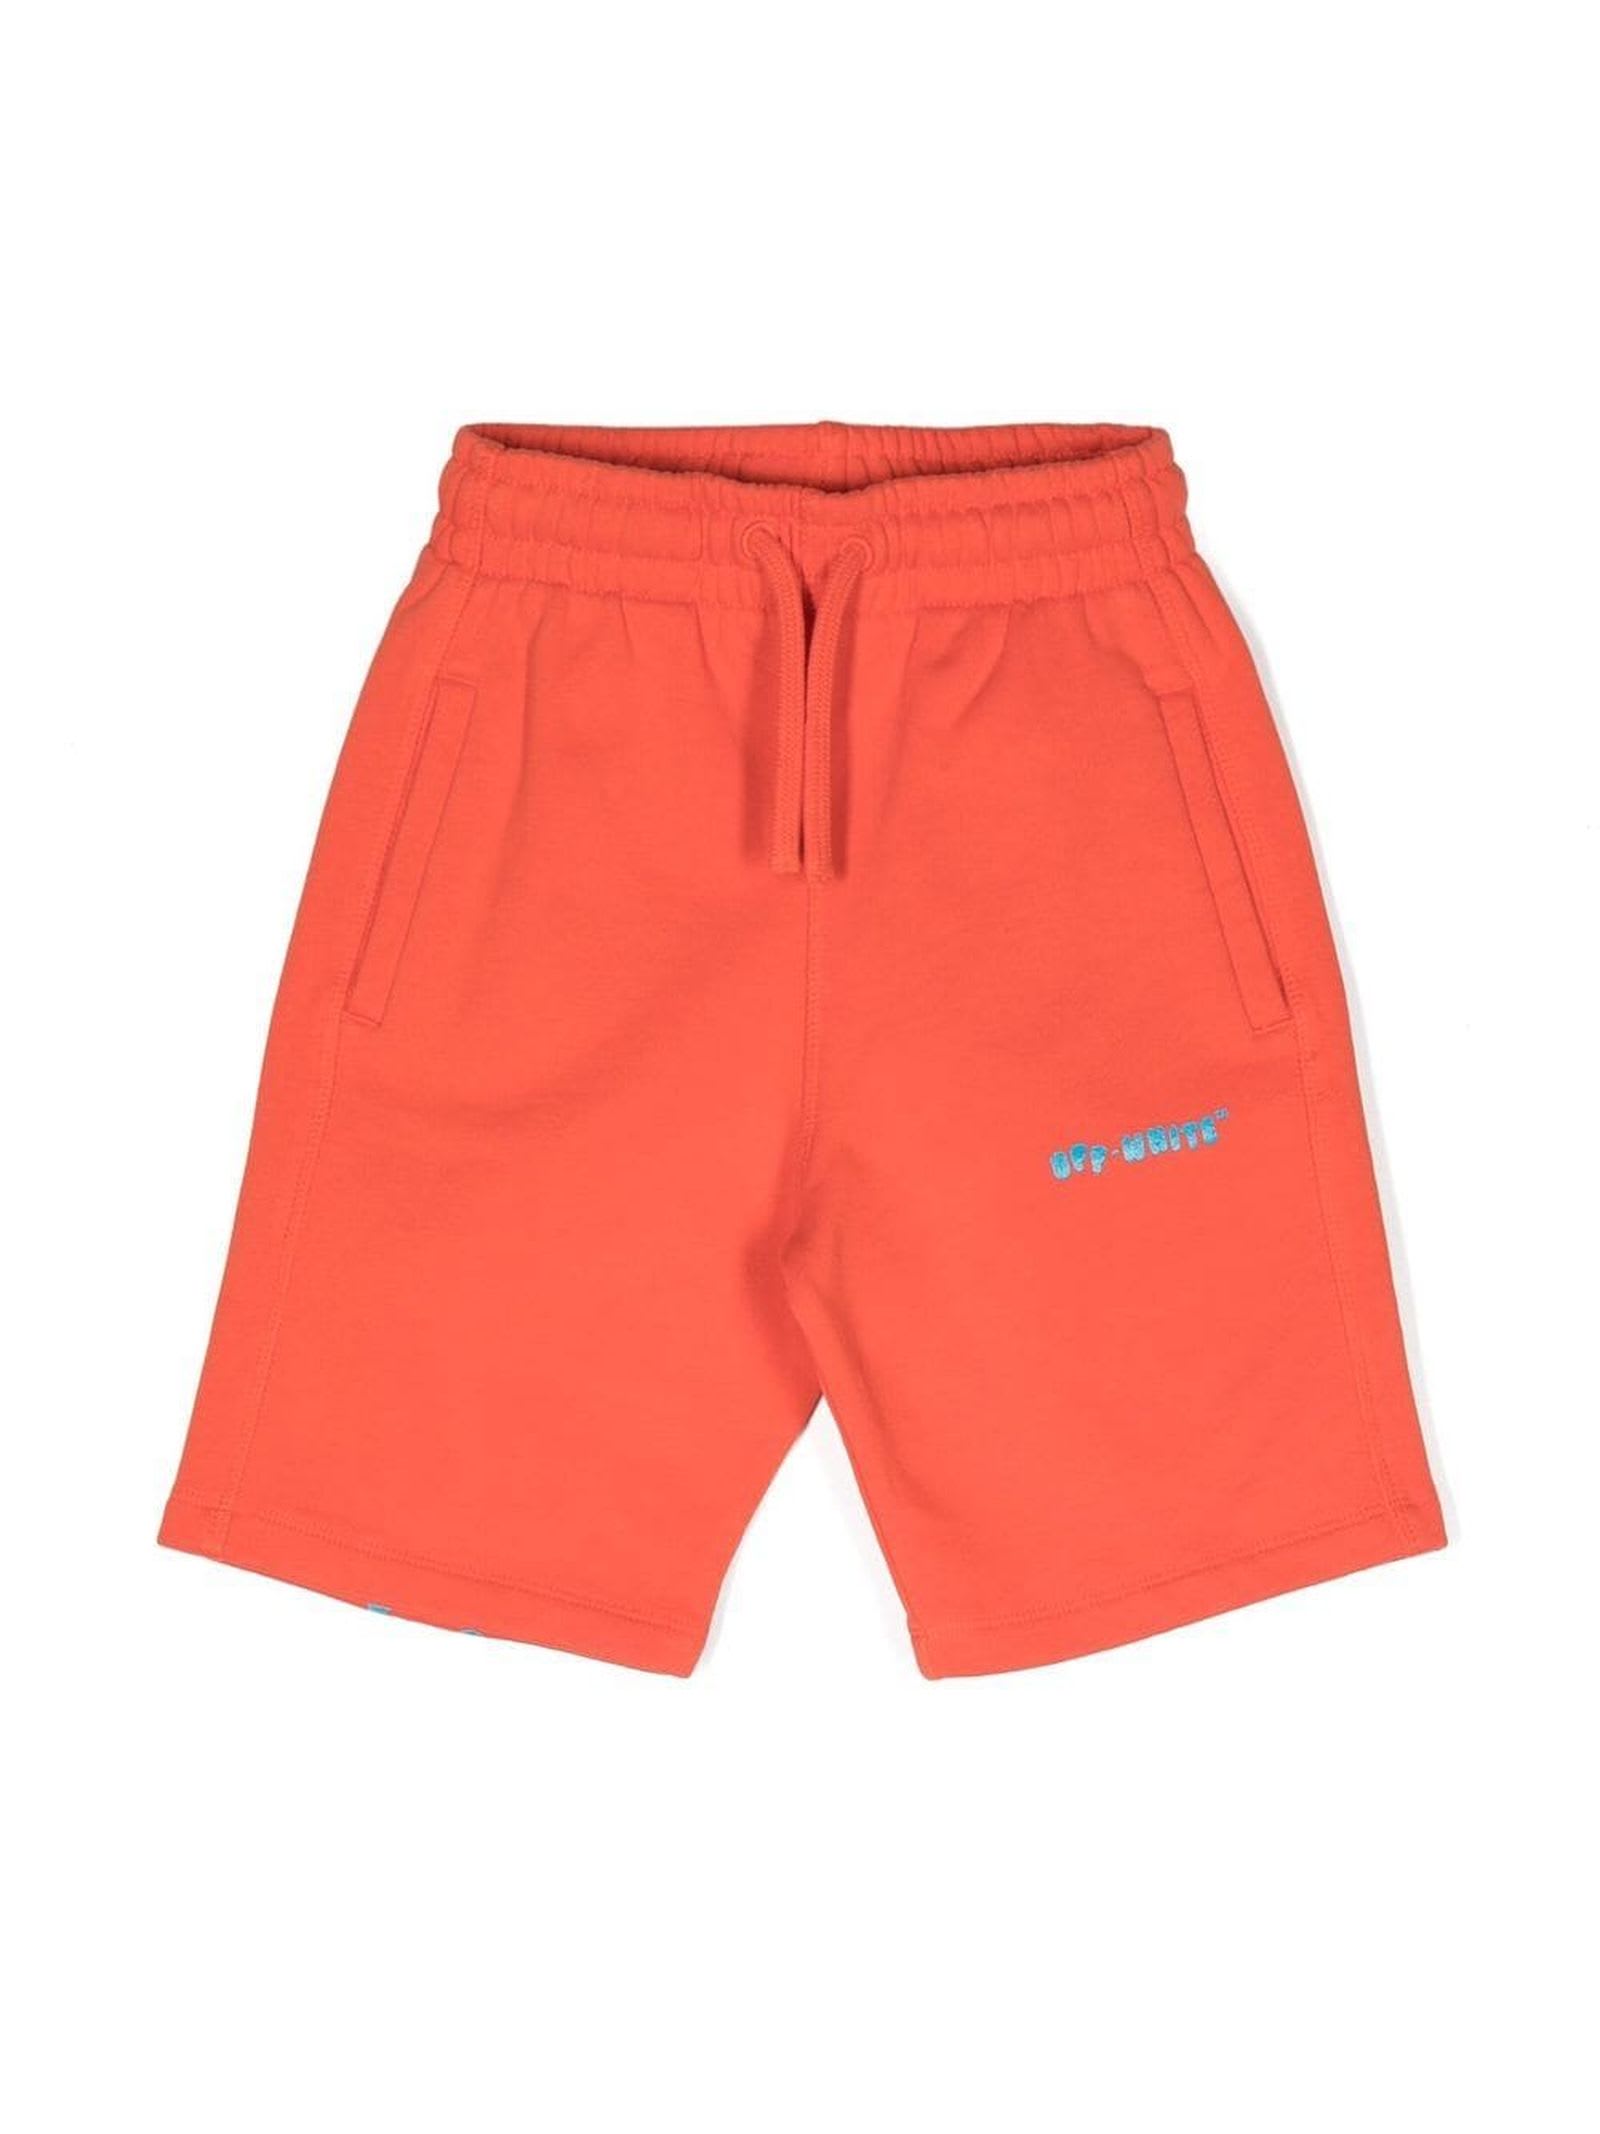 OFF-WHITE RED COTTON SHORTS